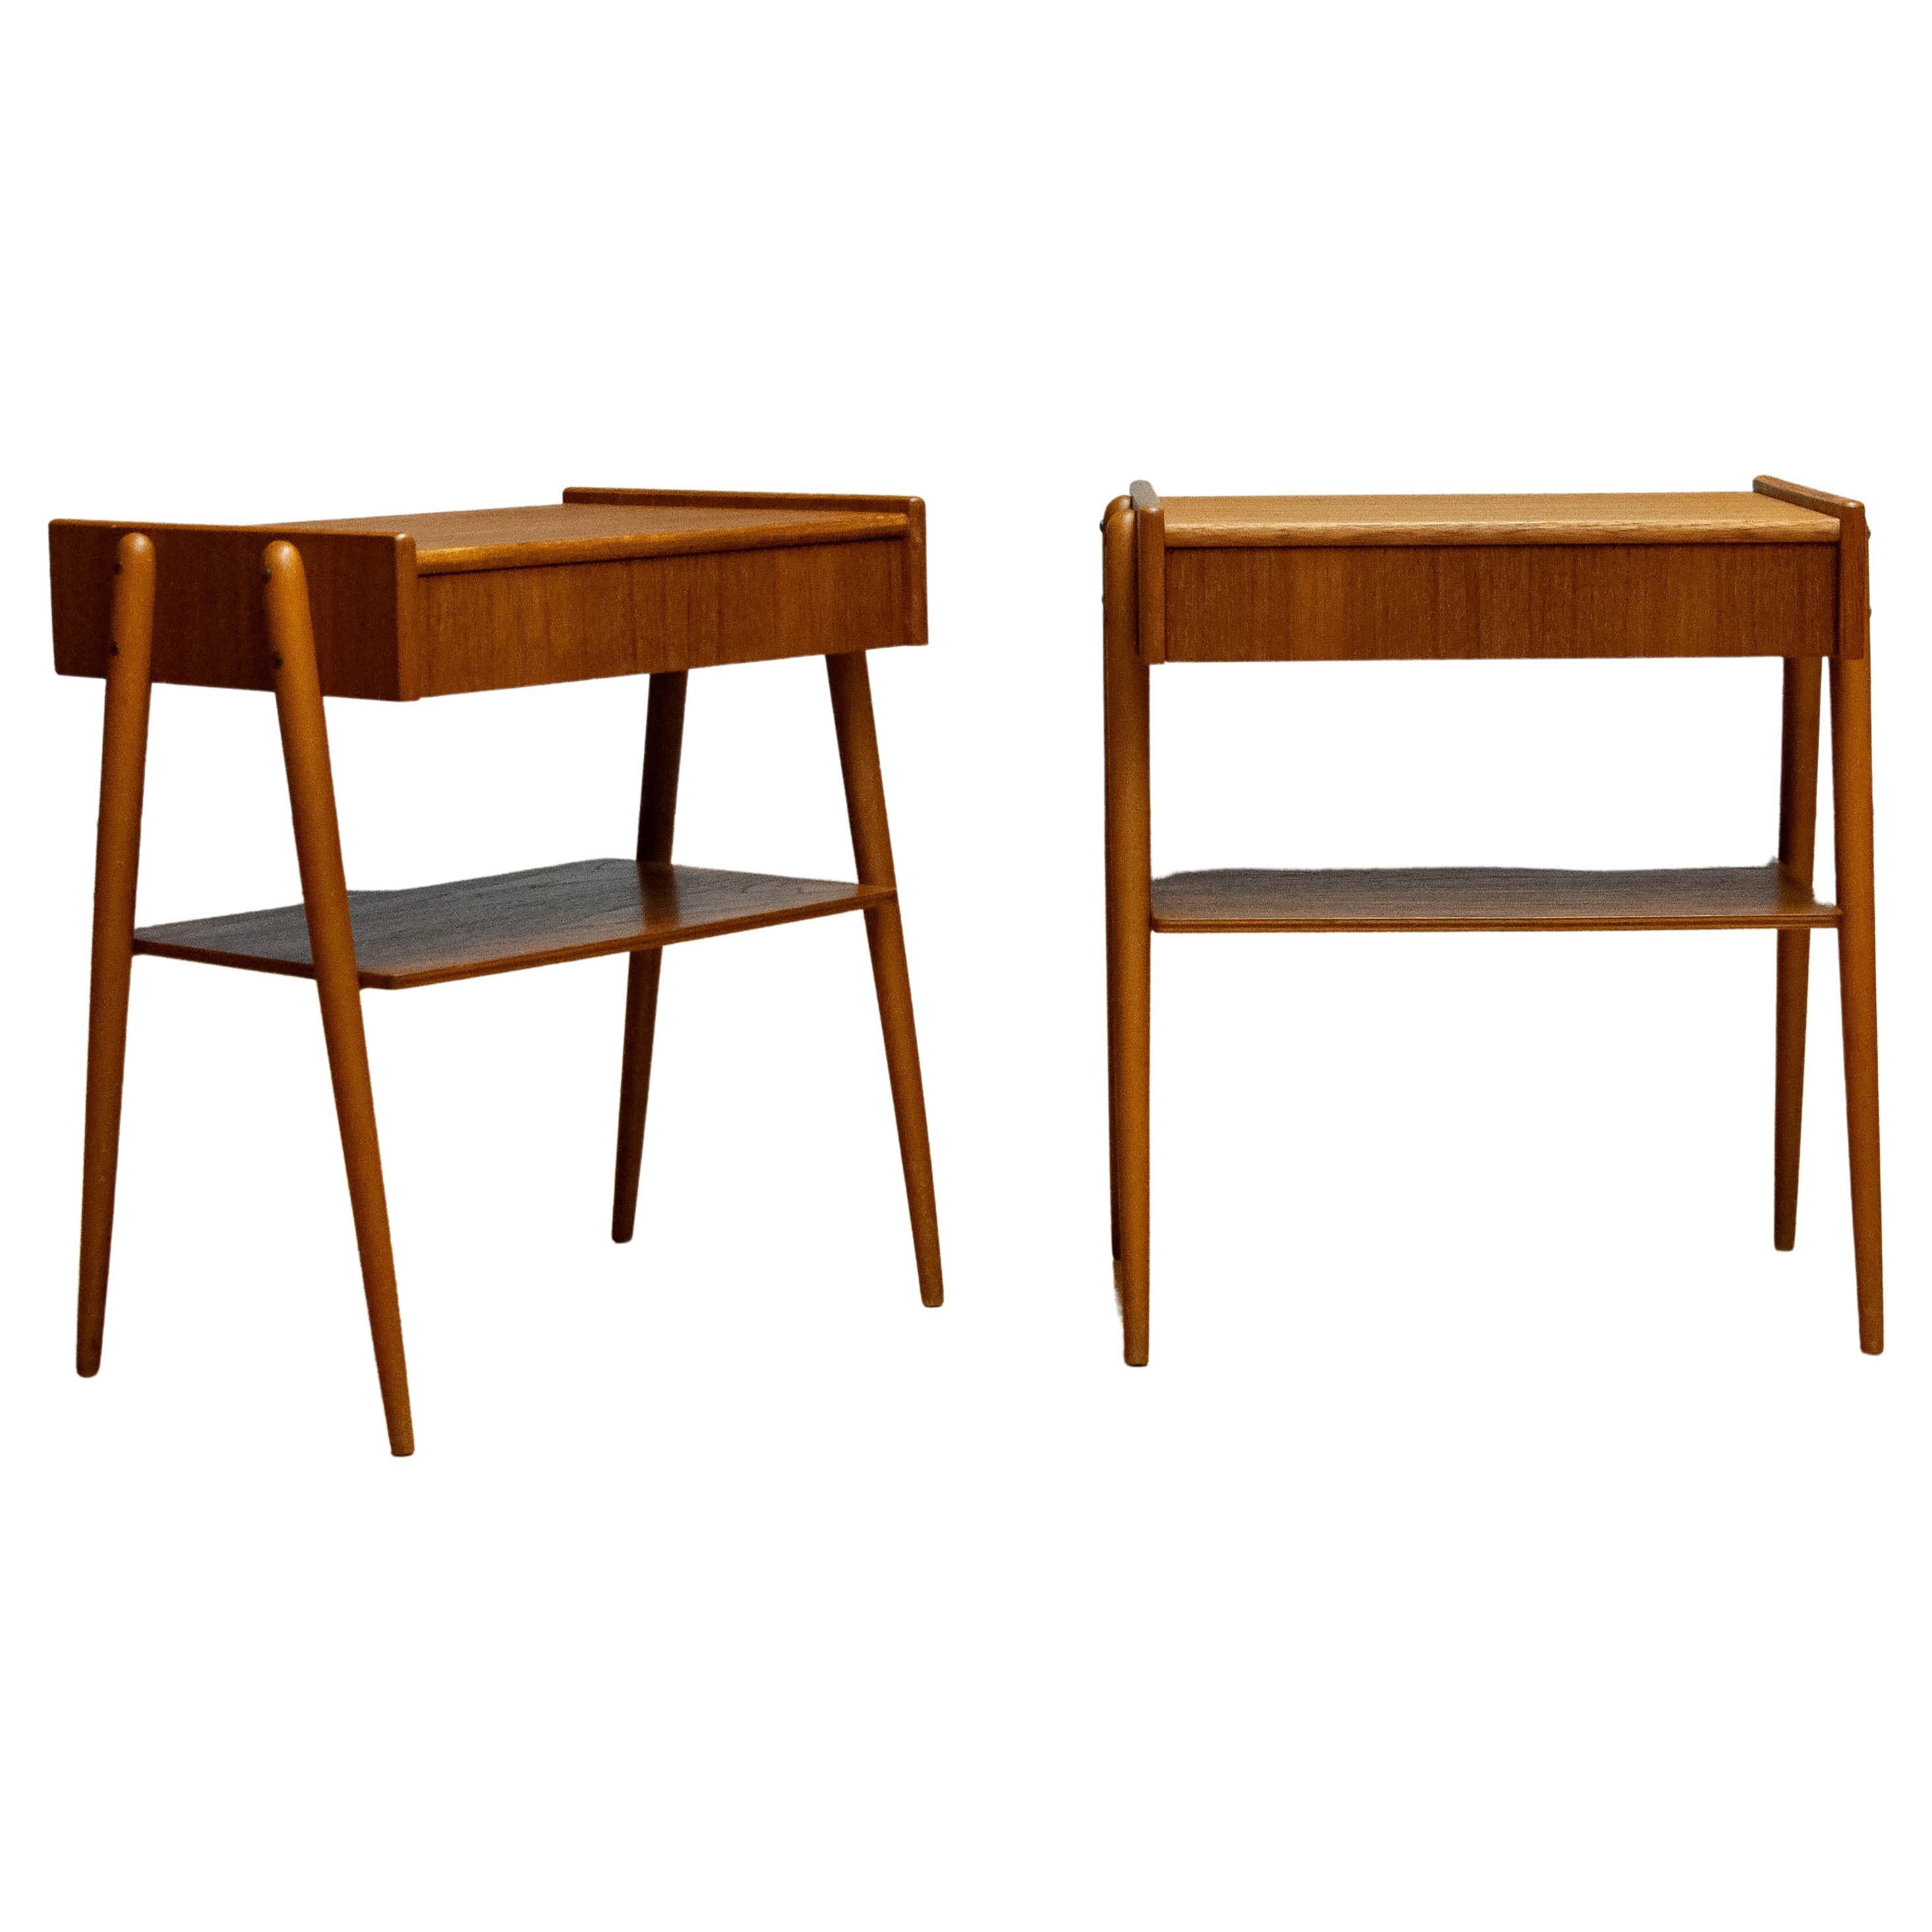 Pair Teak Nightstands Bedside Tables by Carlström & Co from Sweden 1950's